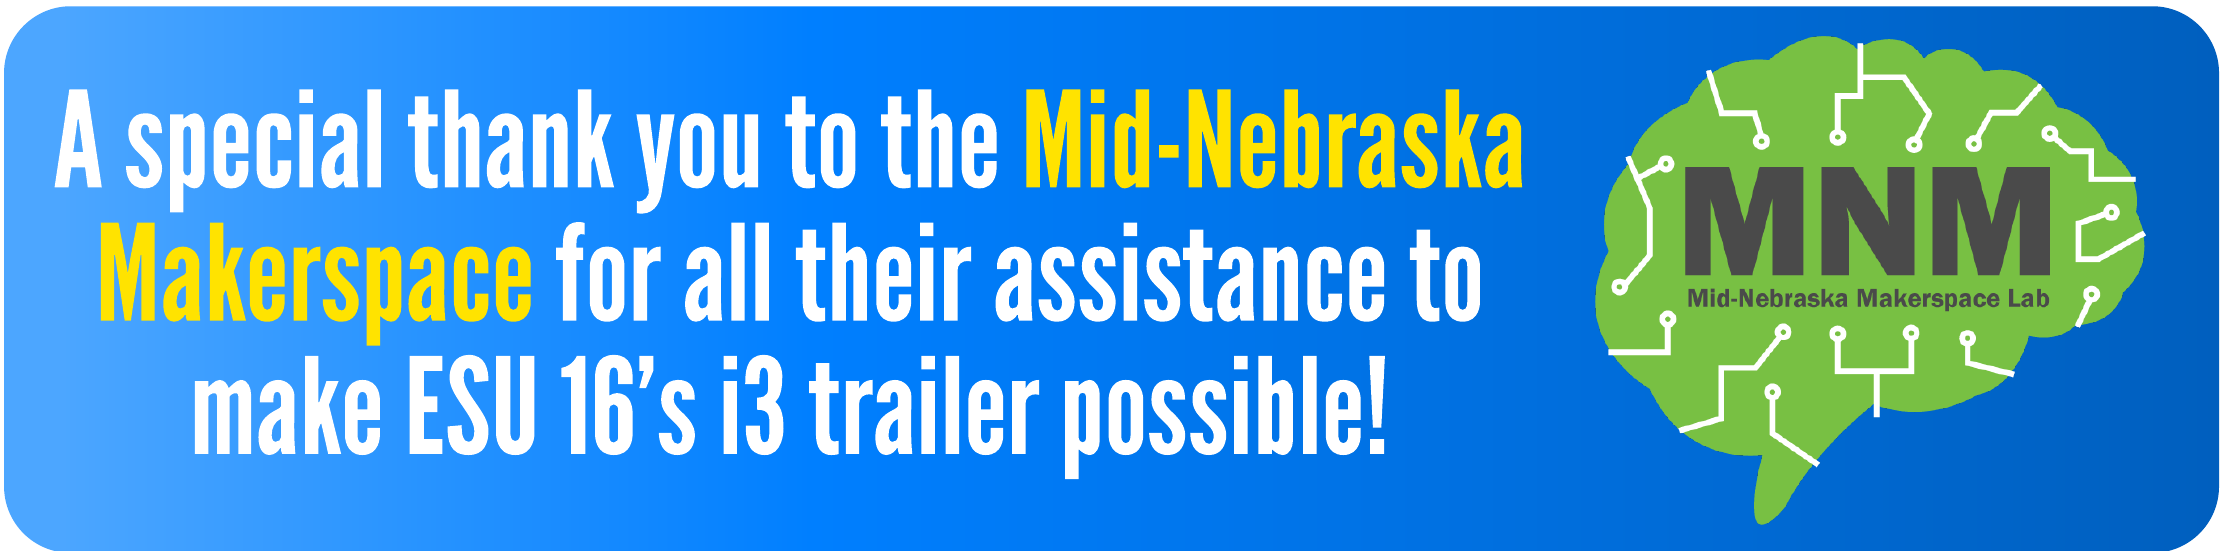 A special thank you to the Mid-Nebraska Makerspace for all their assistance to make ESU 16's i3 trailer possible!